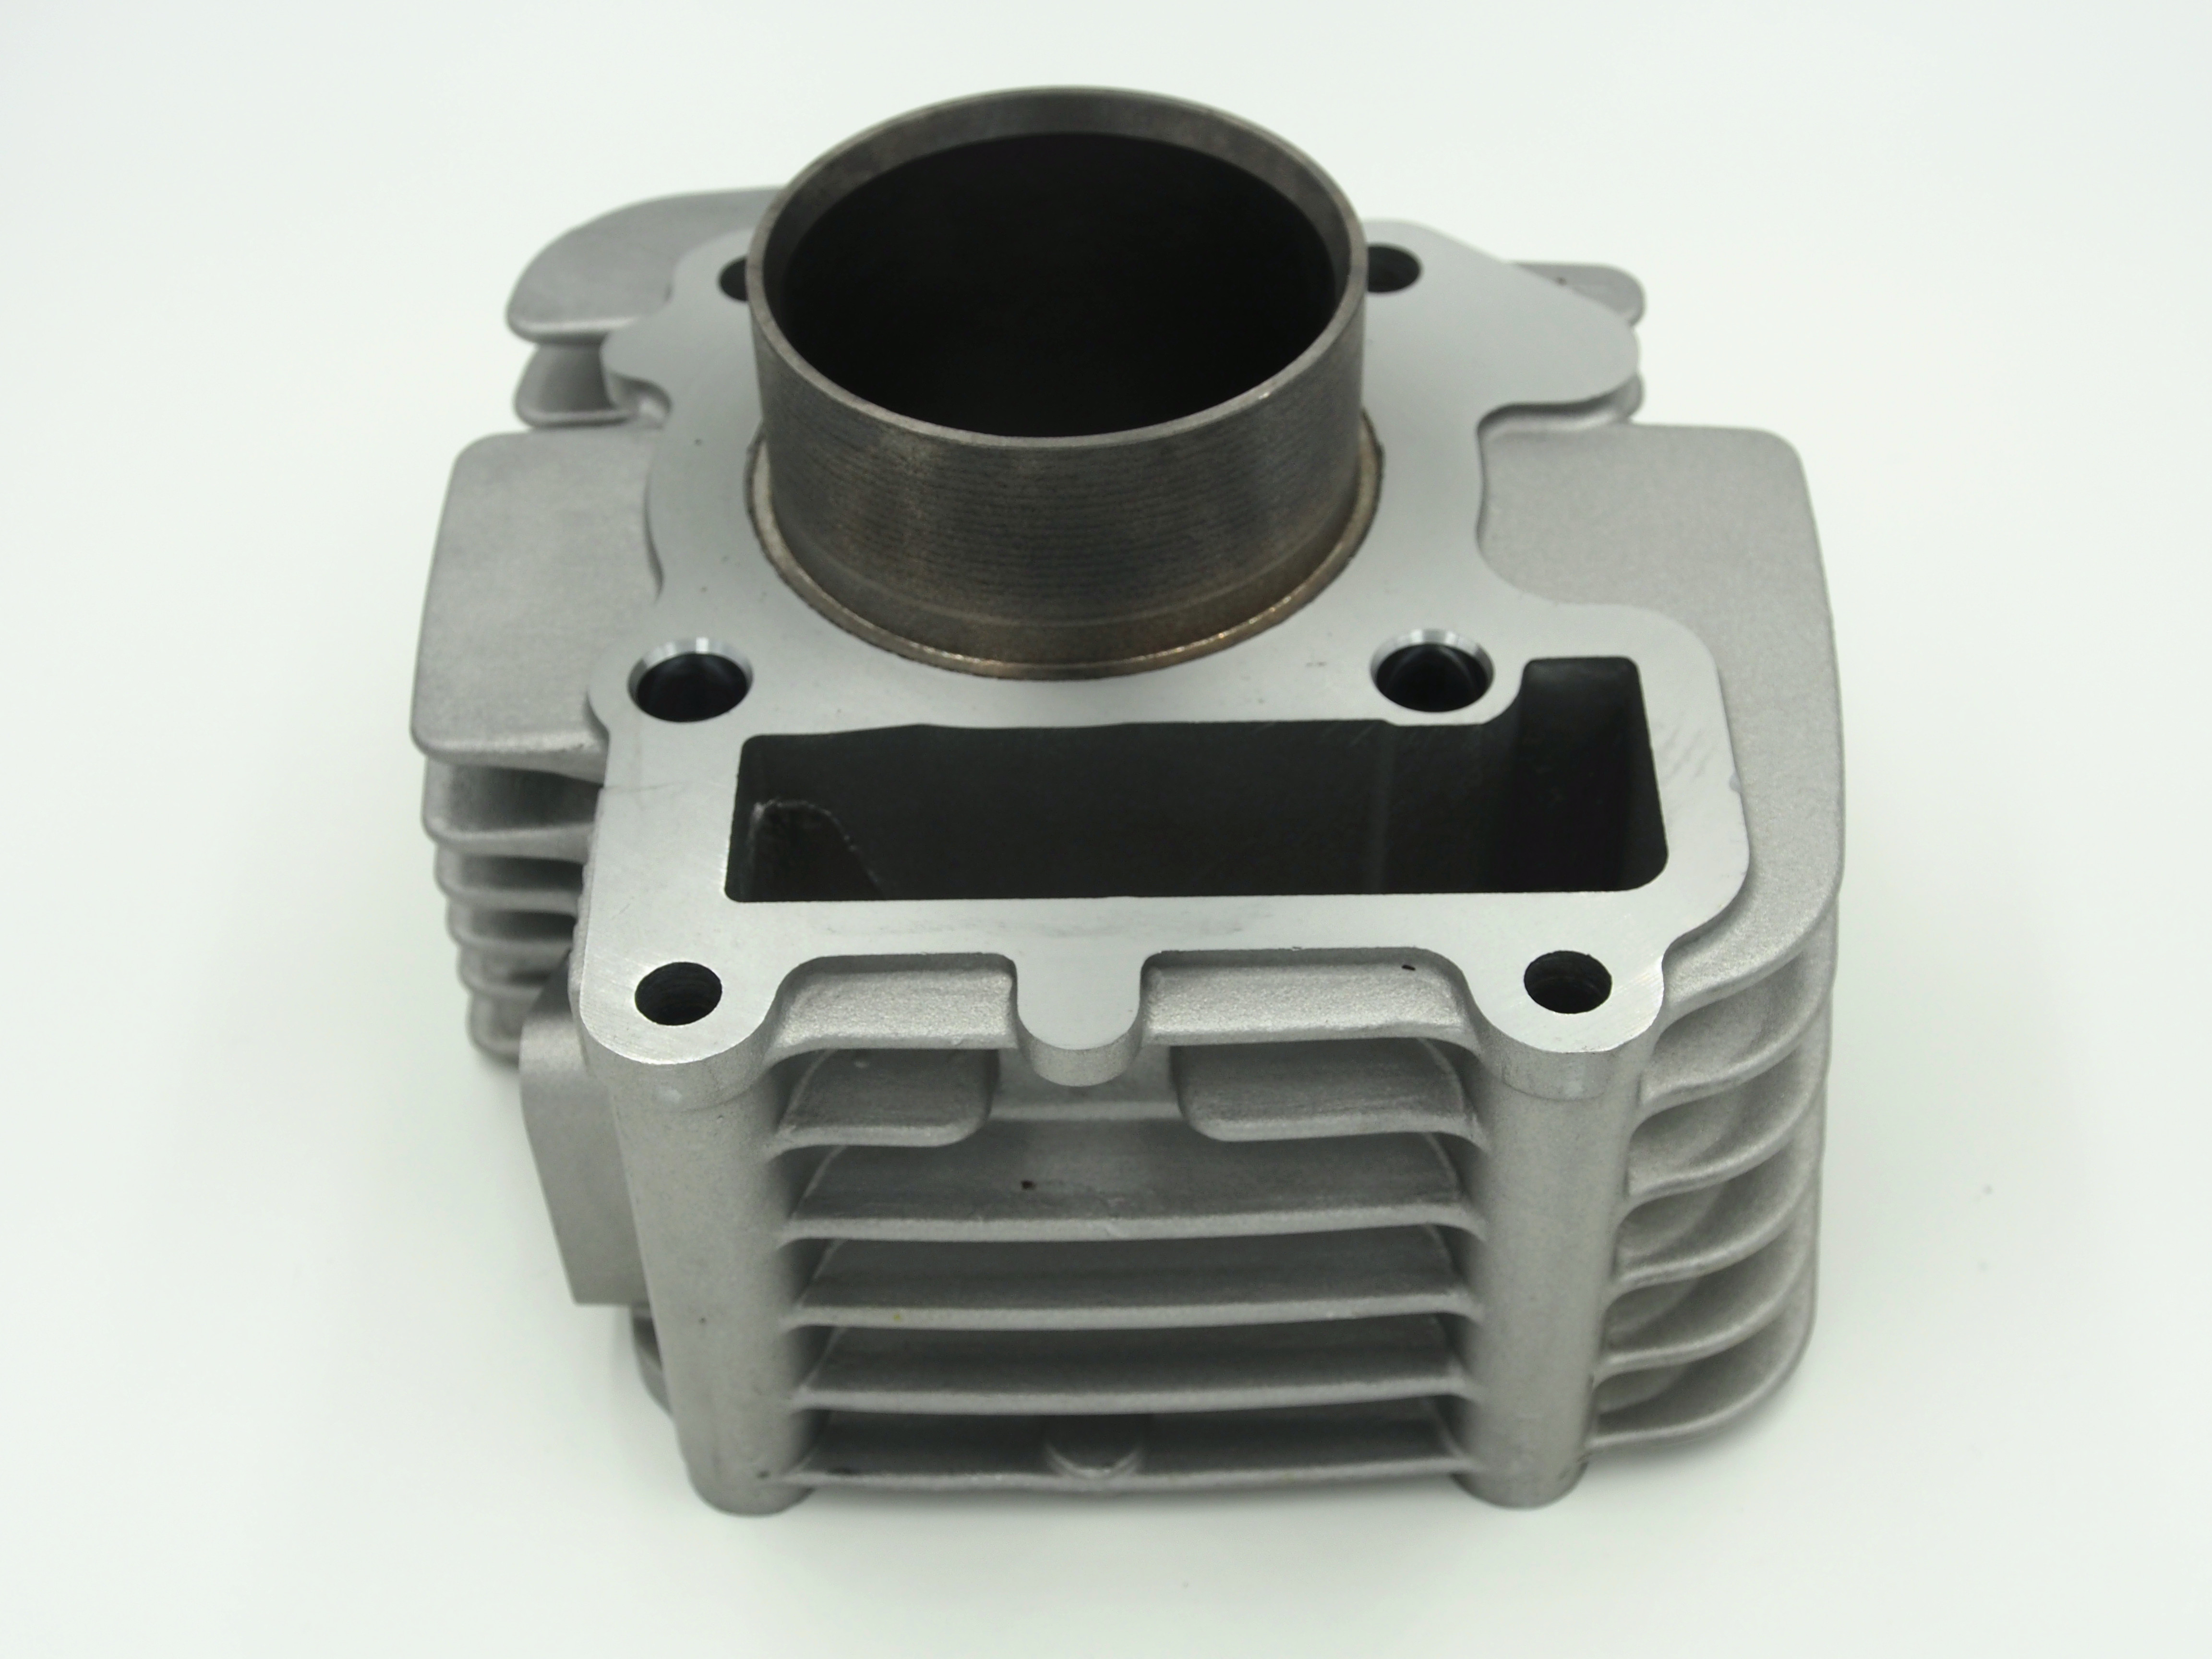 LY151 Motorcycle Cylinder Block 110cc With Clean And Smooth Scavenge Ports